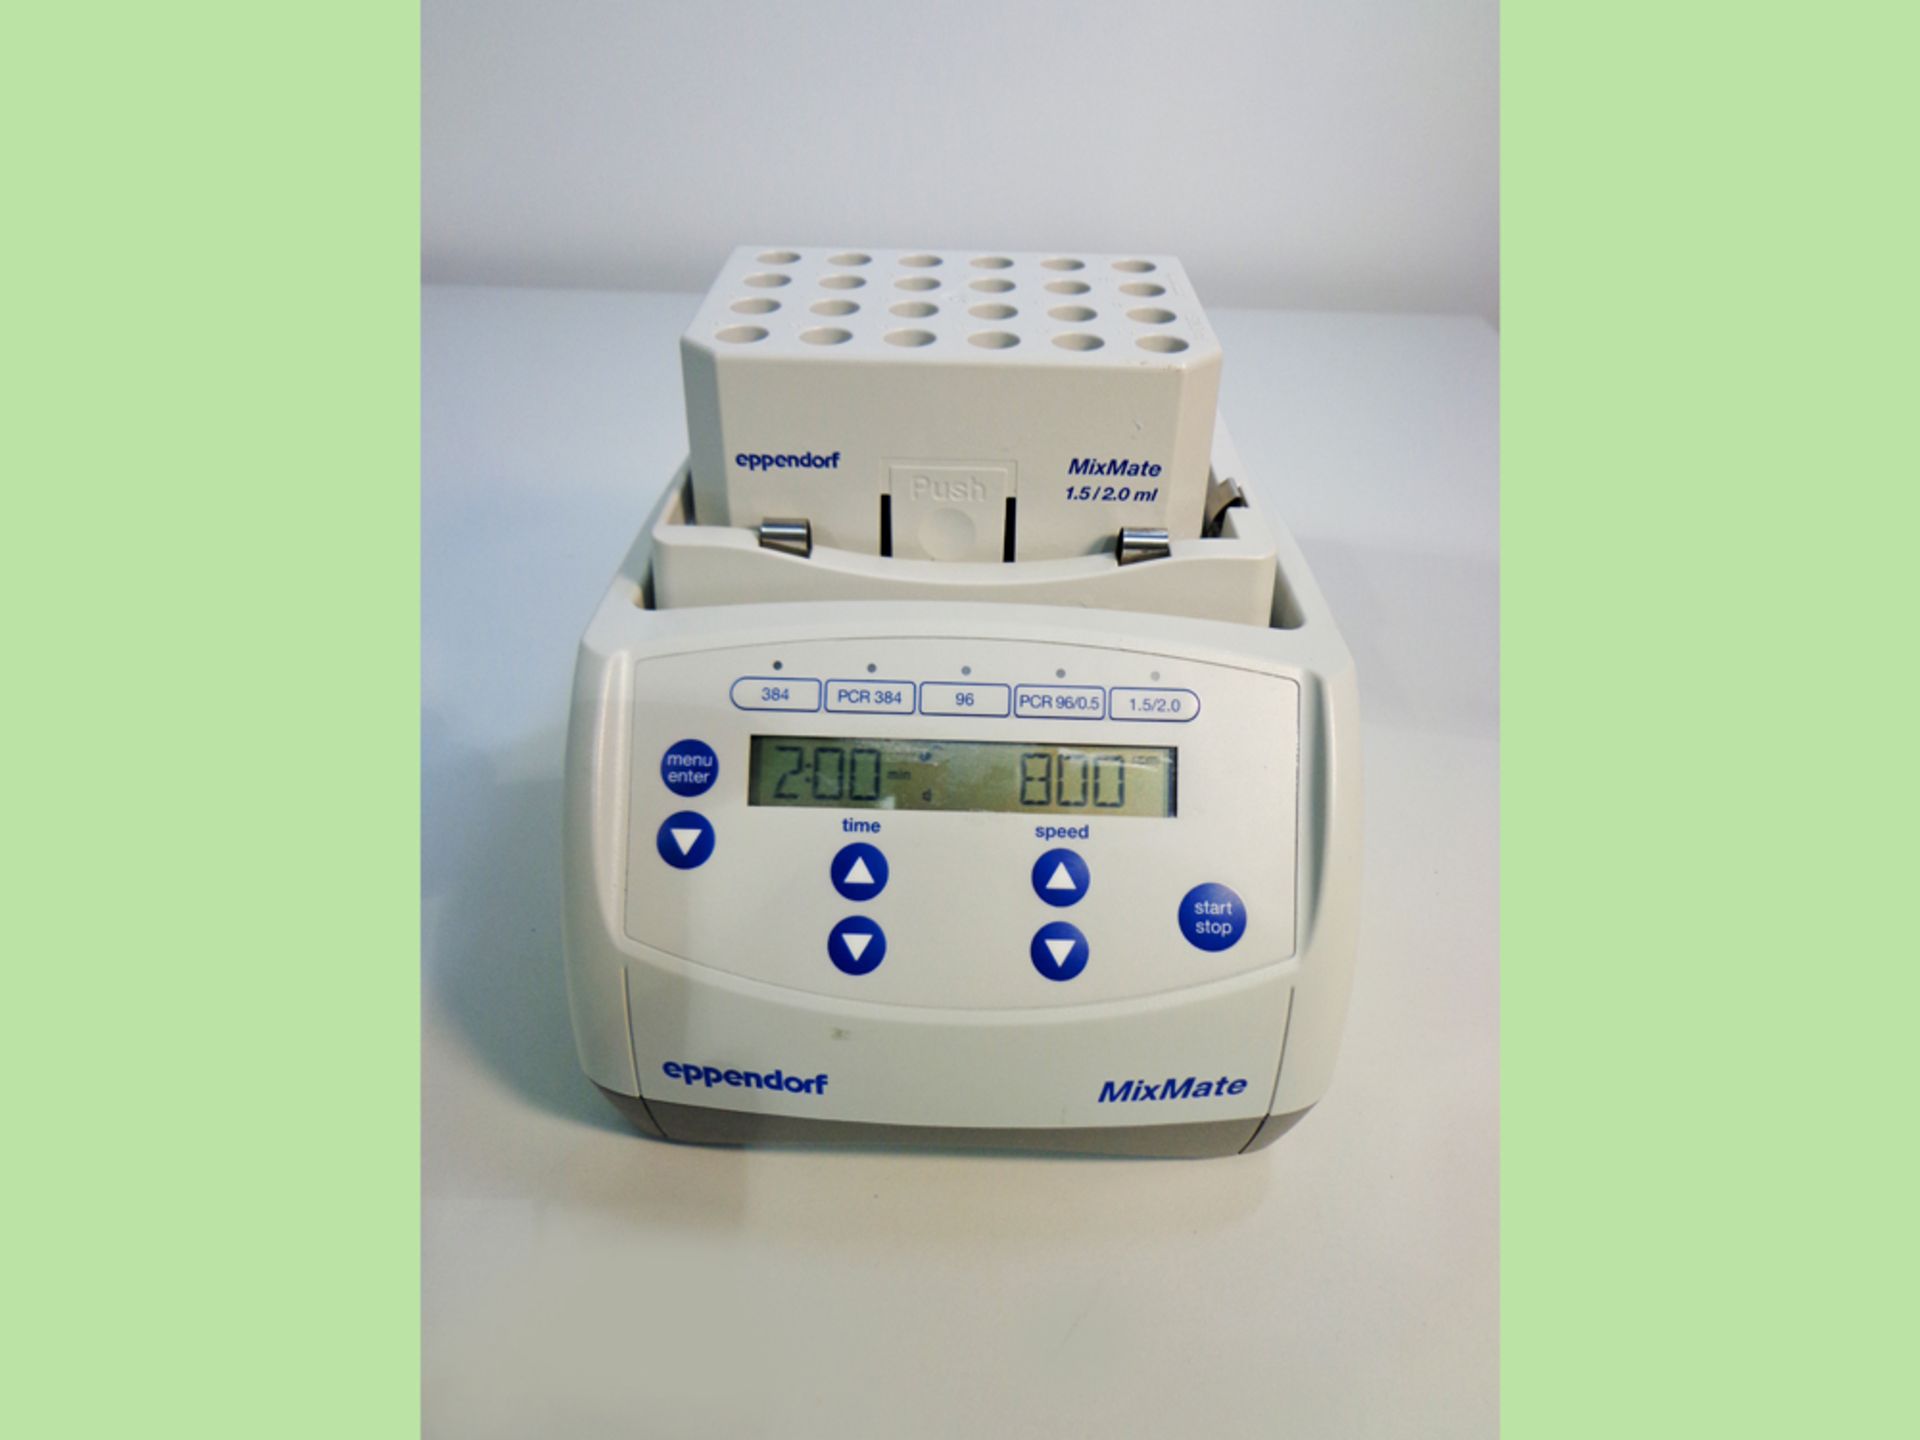 Eppendorf Mixmate Microplate Shaker, model 5353, S/N 5353AN013266 - Image 2 of 7